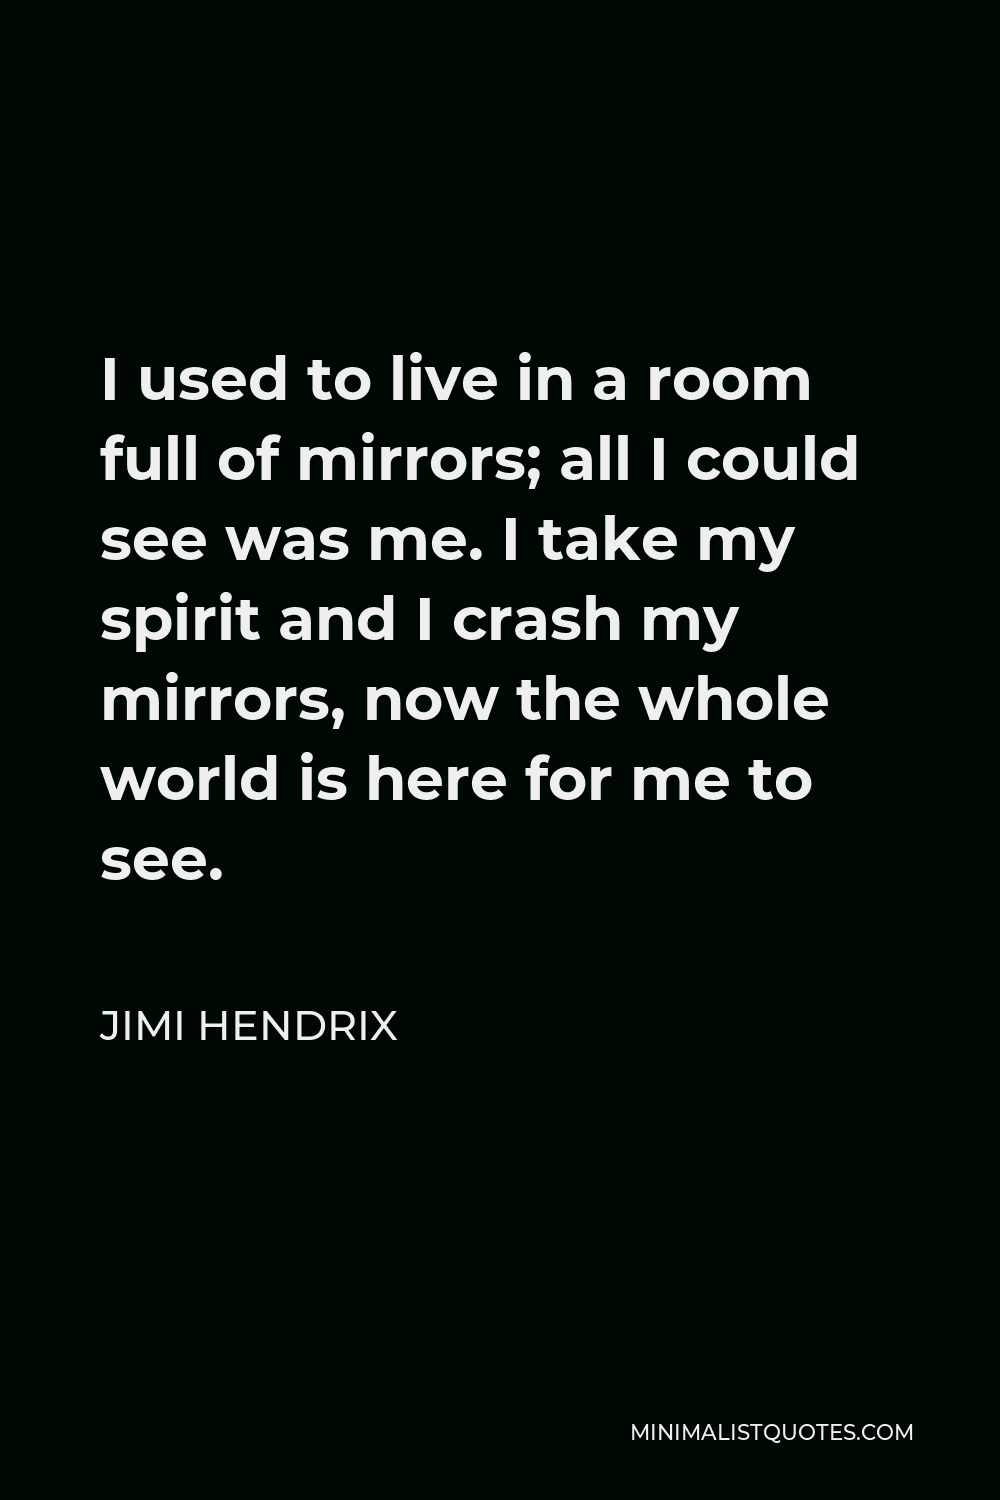 Jimi Hendrix Quote - I used to live in a room full of mirrors; all I could see was me. I take my spirit and I crash my mirrors, now the whole world is here for me to see.